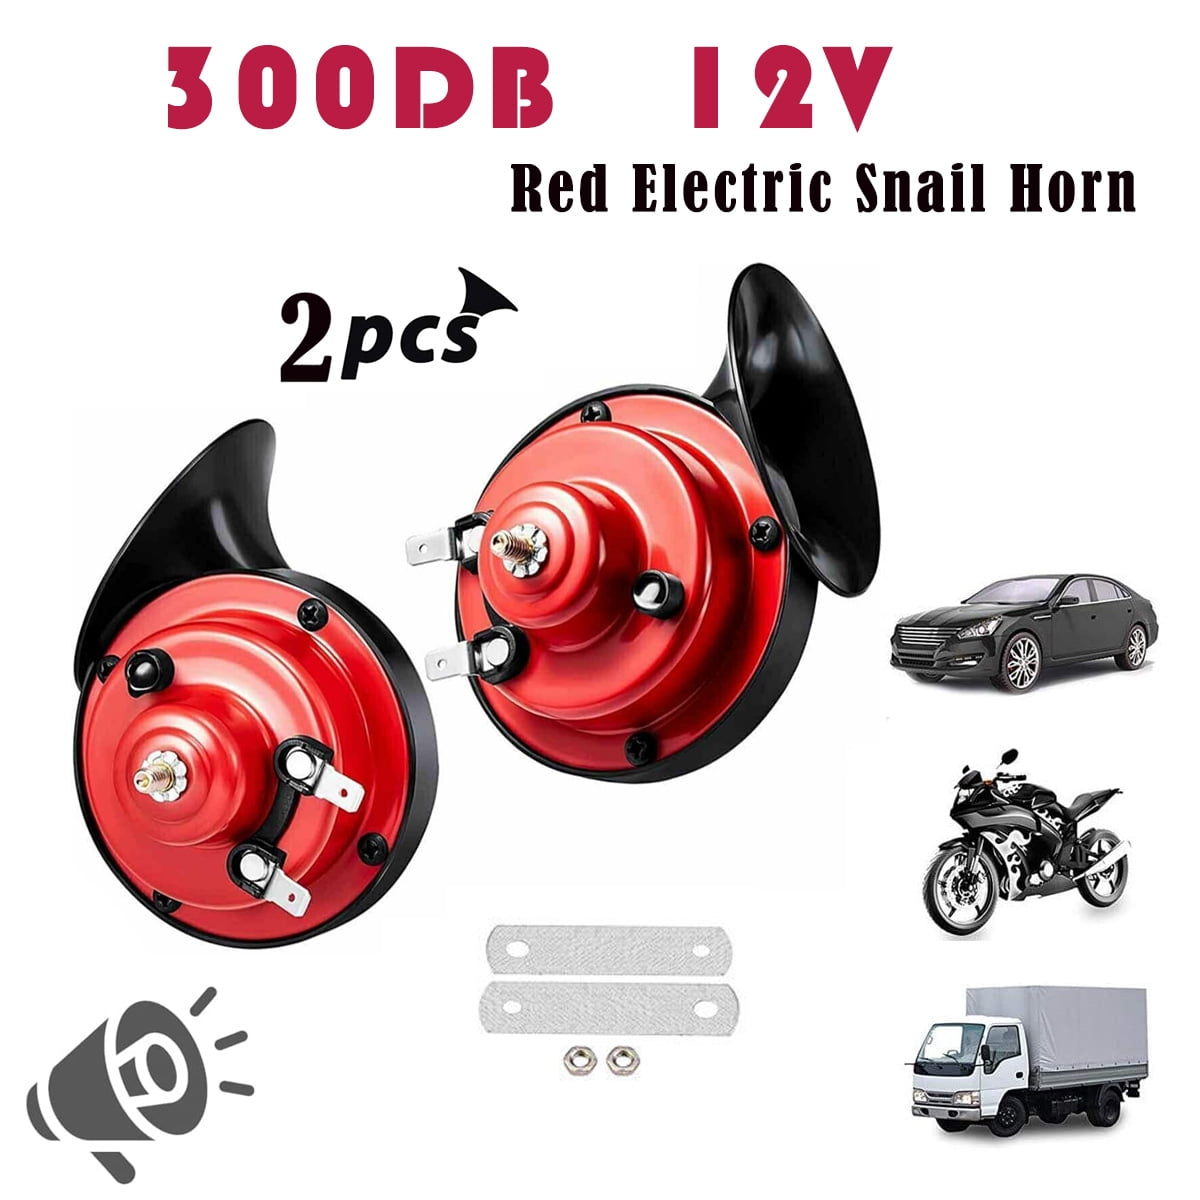 2 PACK 12V 300DB Super Loud Train Horn Waterproof for Motorcycle Car Truck  SUV Boat Red